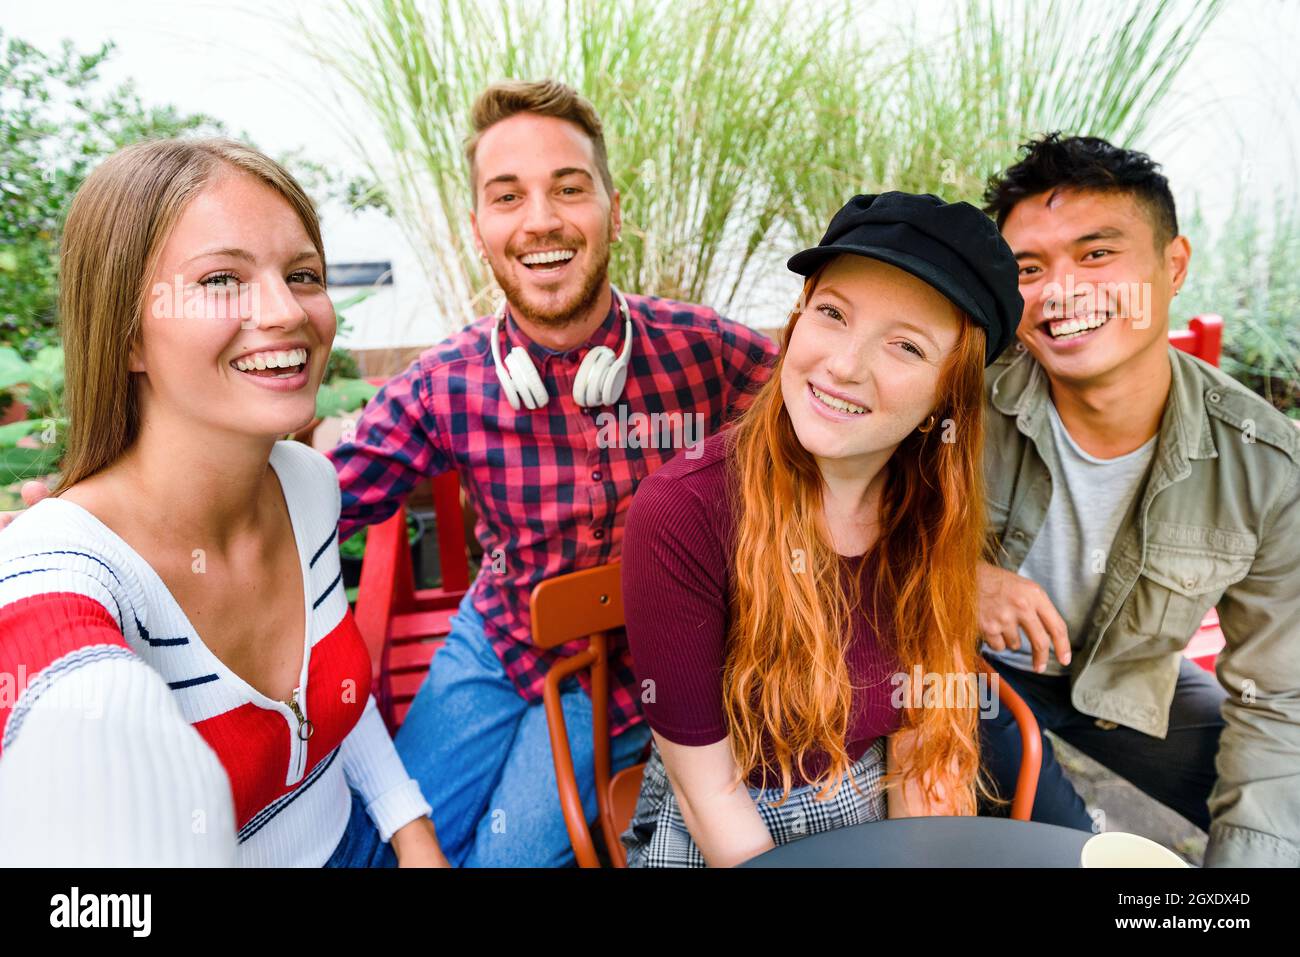 Happy laughing diverse group of young friends taking a selfie together grouped around a table on an outdoor patio Stock Photo